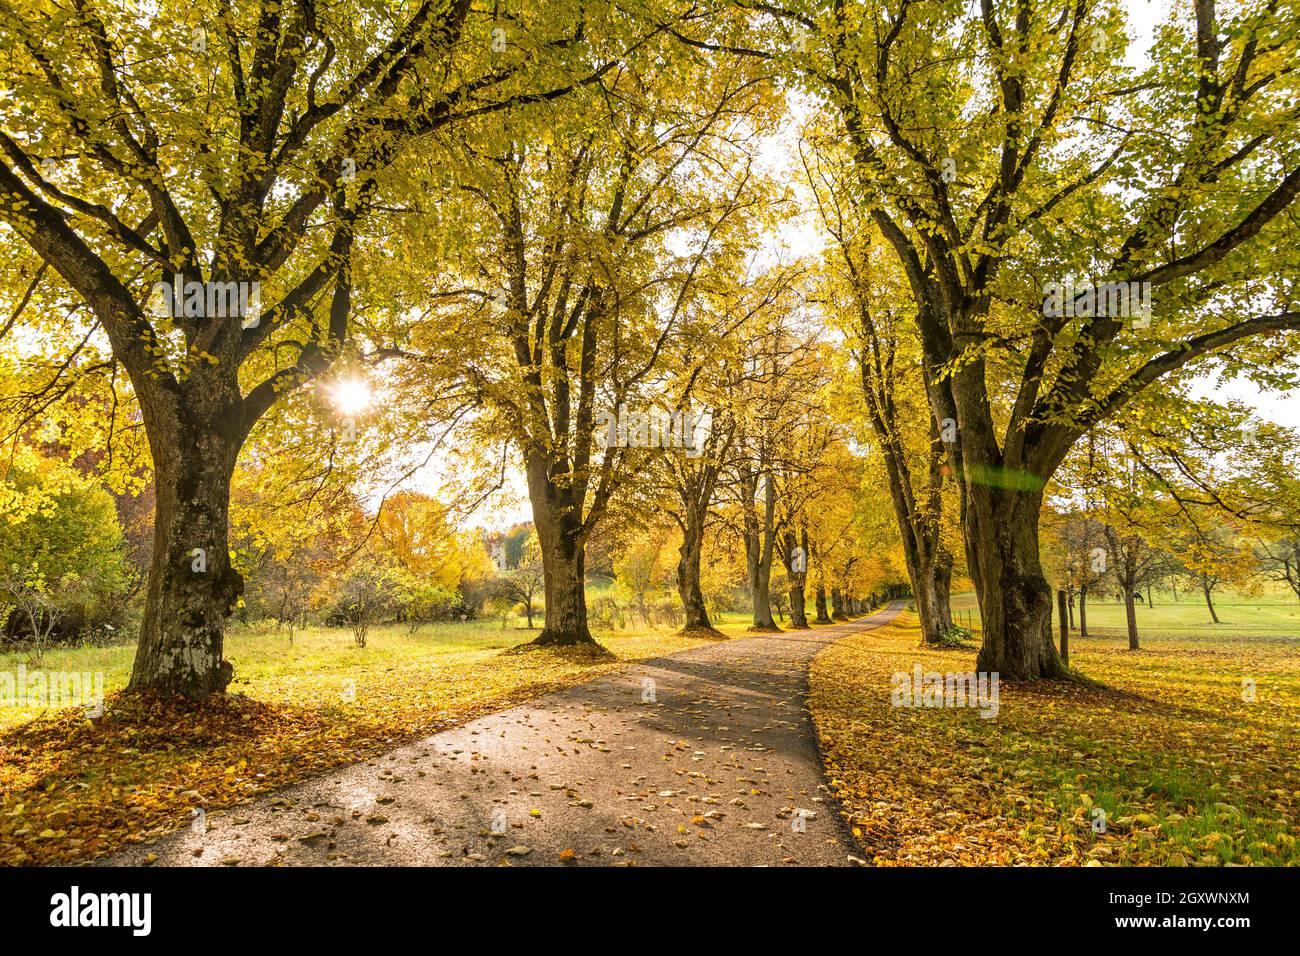 Scenic tree-lined county road in autumn with sun shining through the yellow leaves of the trees Stock Photo